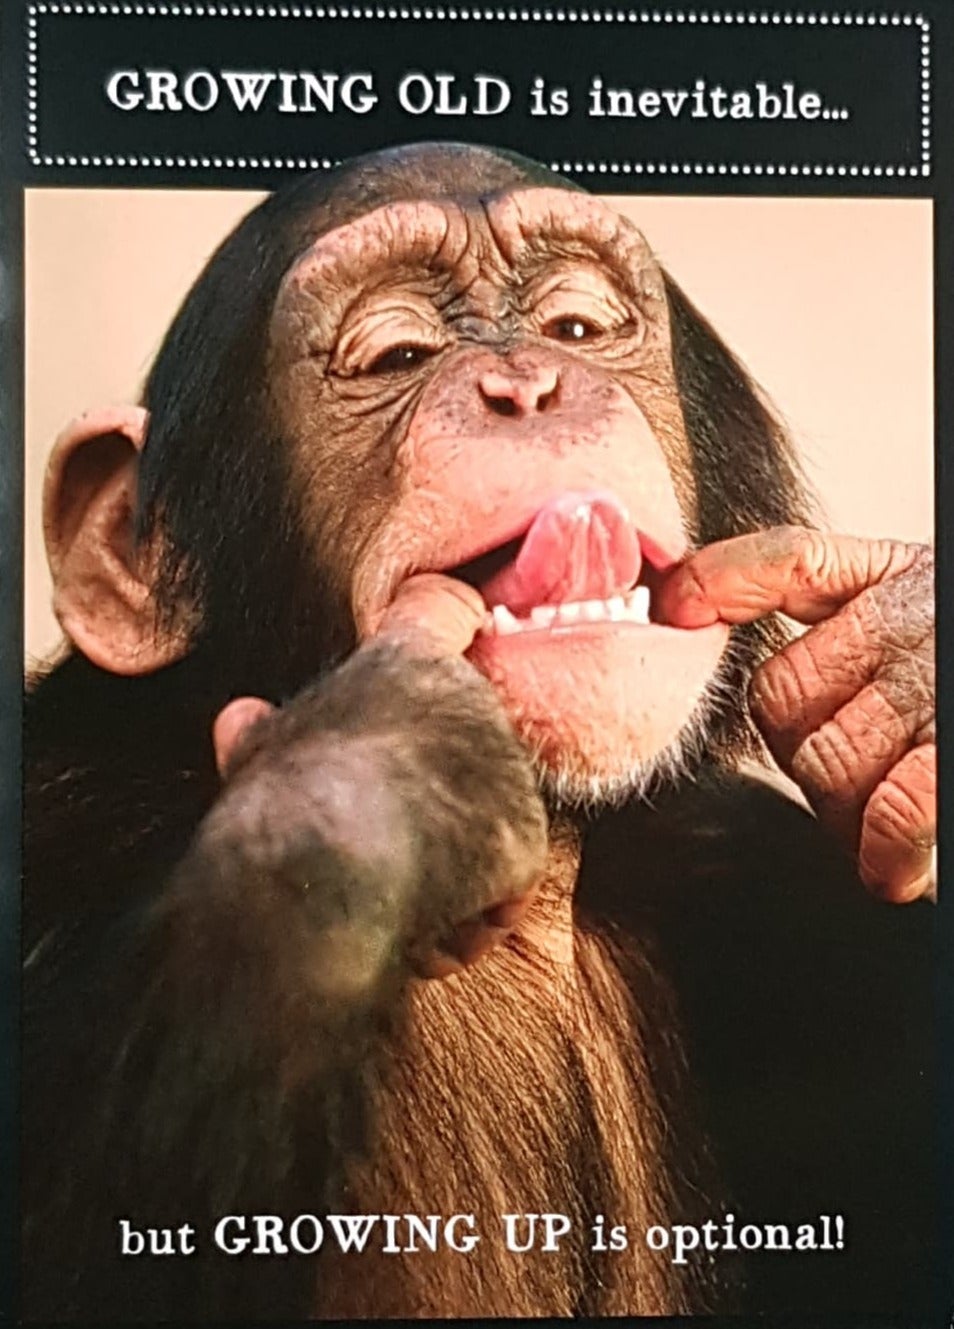 Birthday Card - General Humour / A Monkey Making Silly Face 'Growing Up Is Optional'